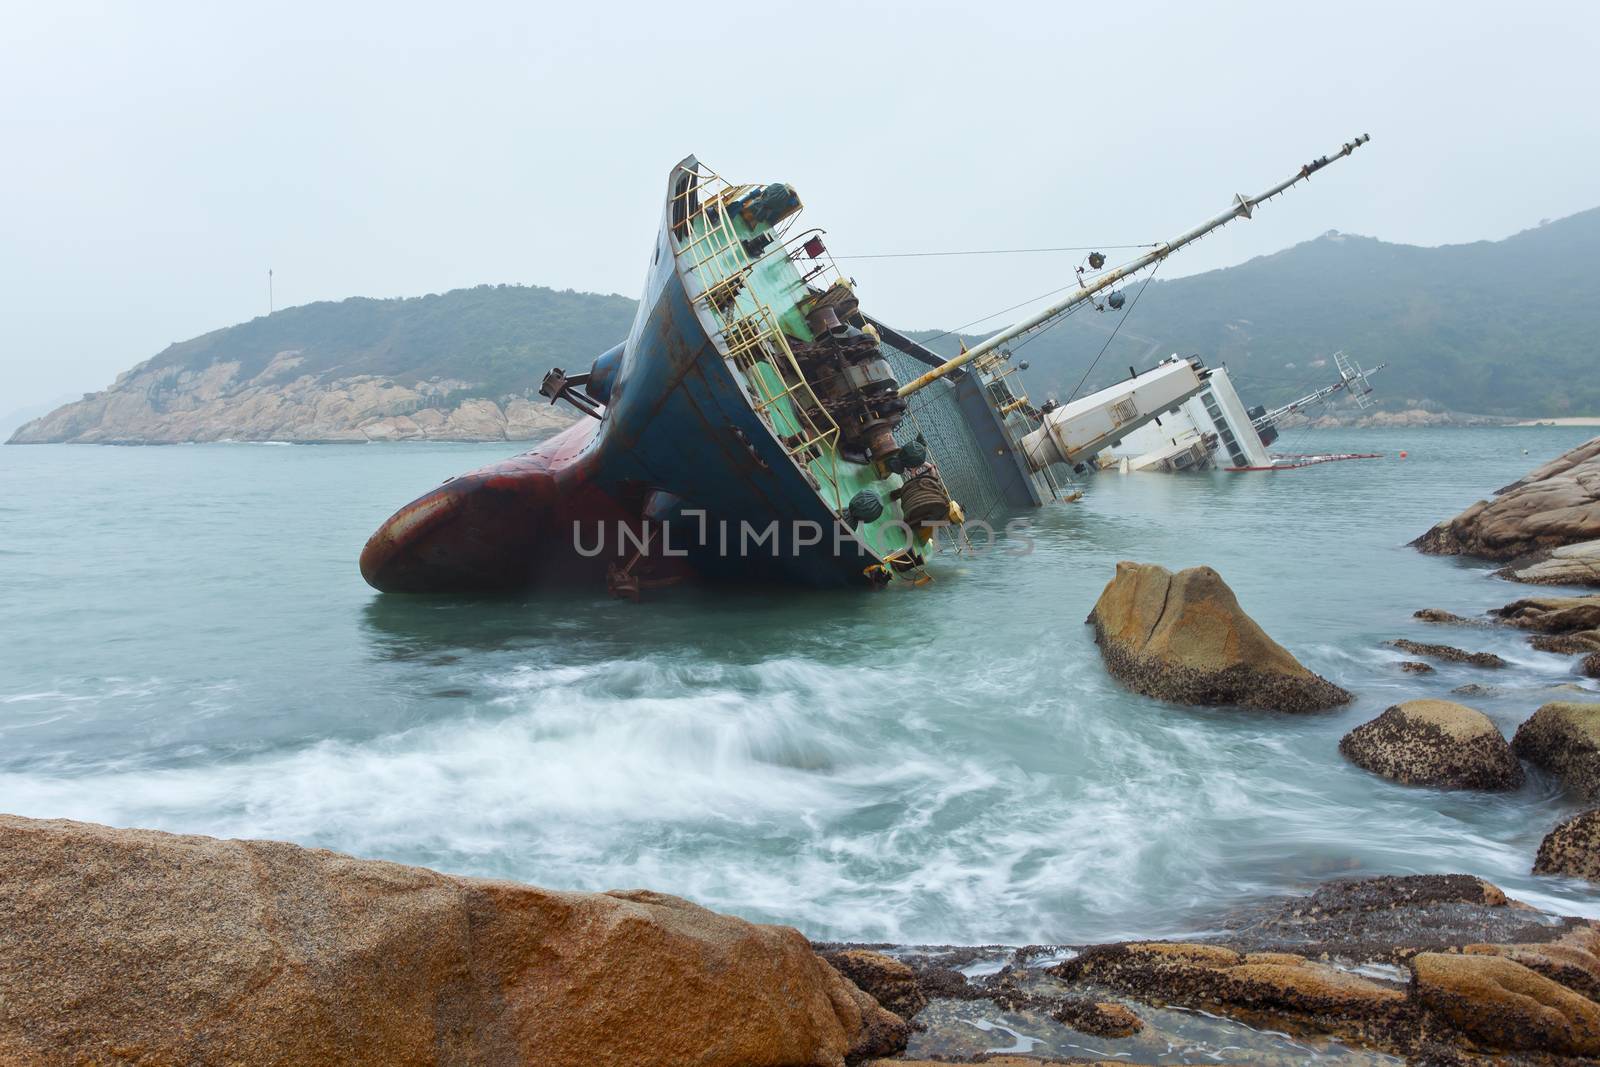 Wreck on the coast in Hong Kong by kawing921